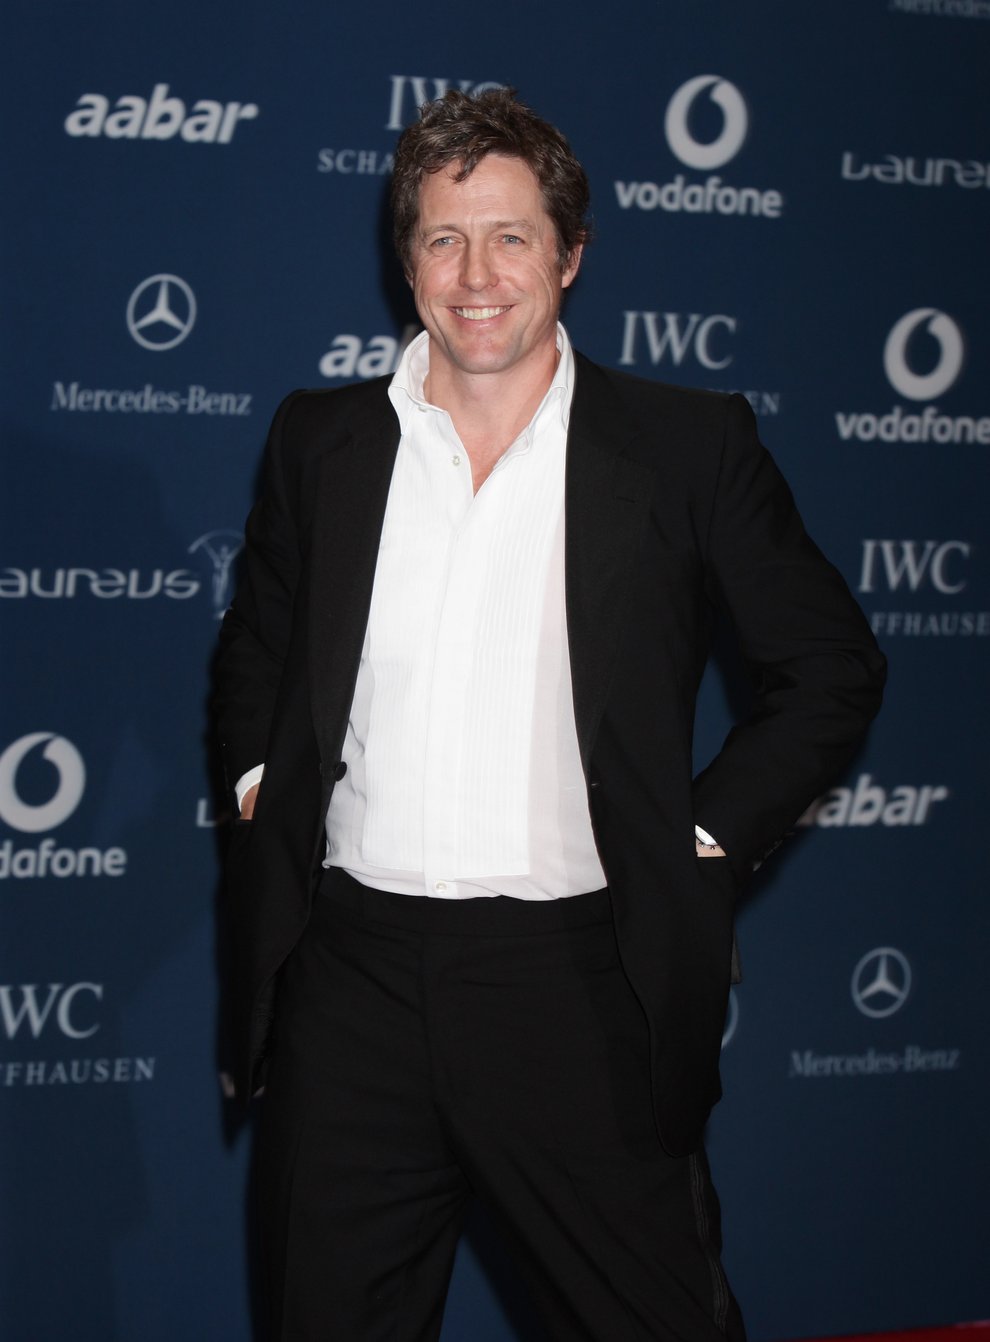 Grant has attended the Laureus Awards several times, both as a host and guest (PA Images)